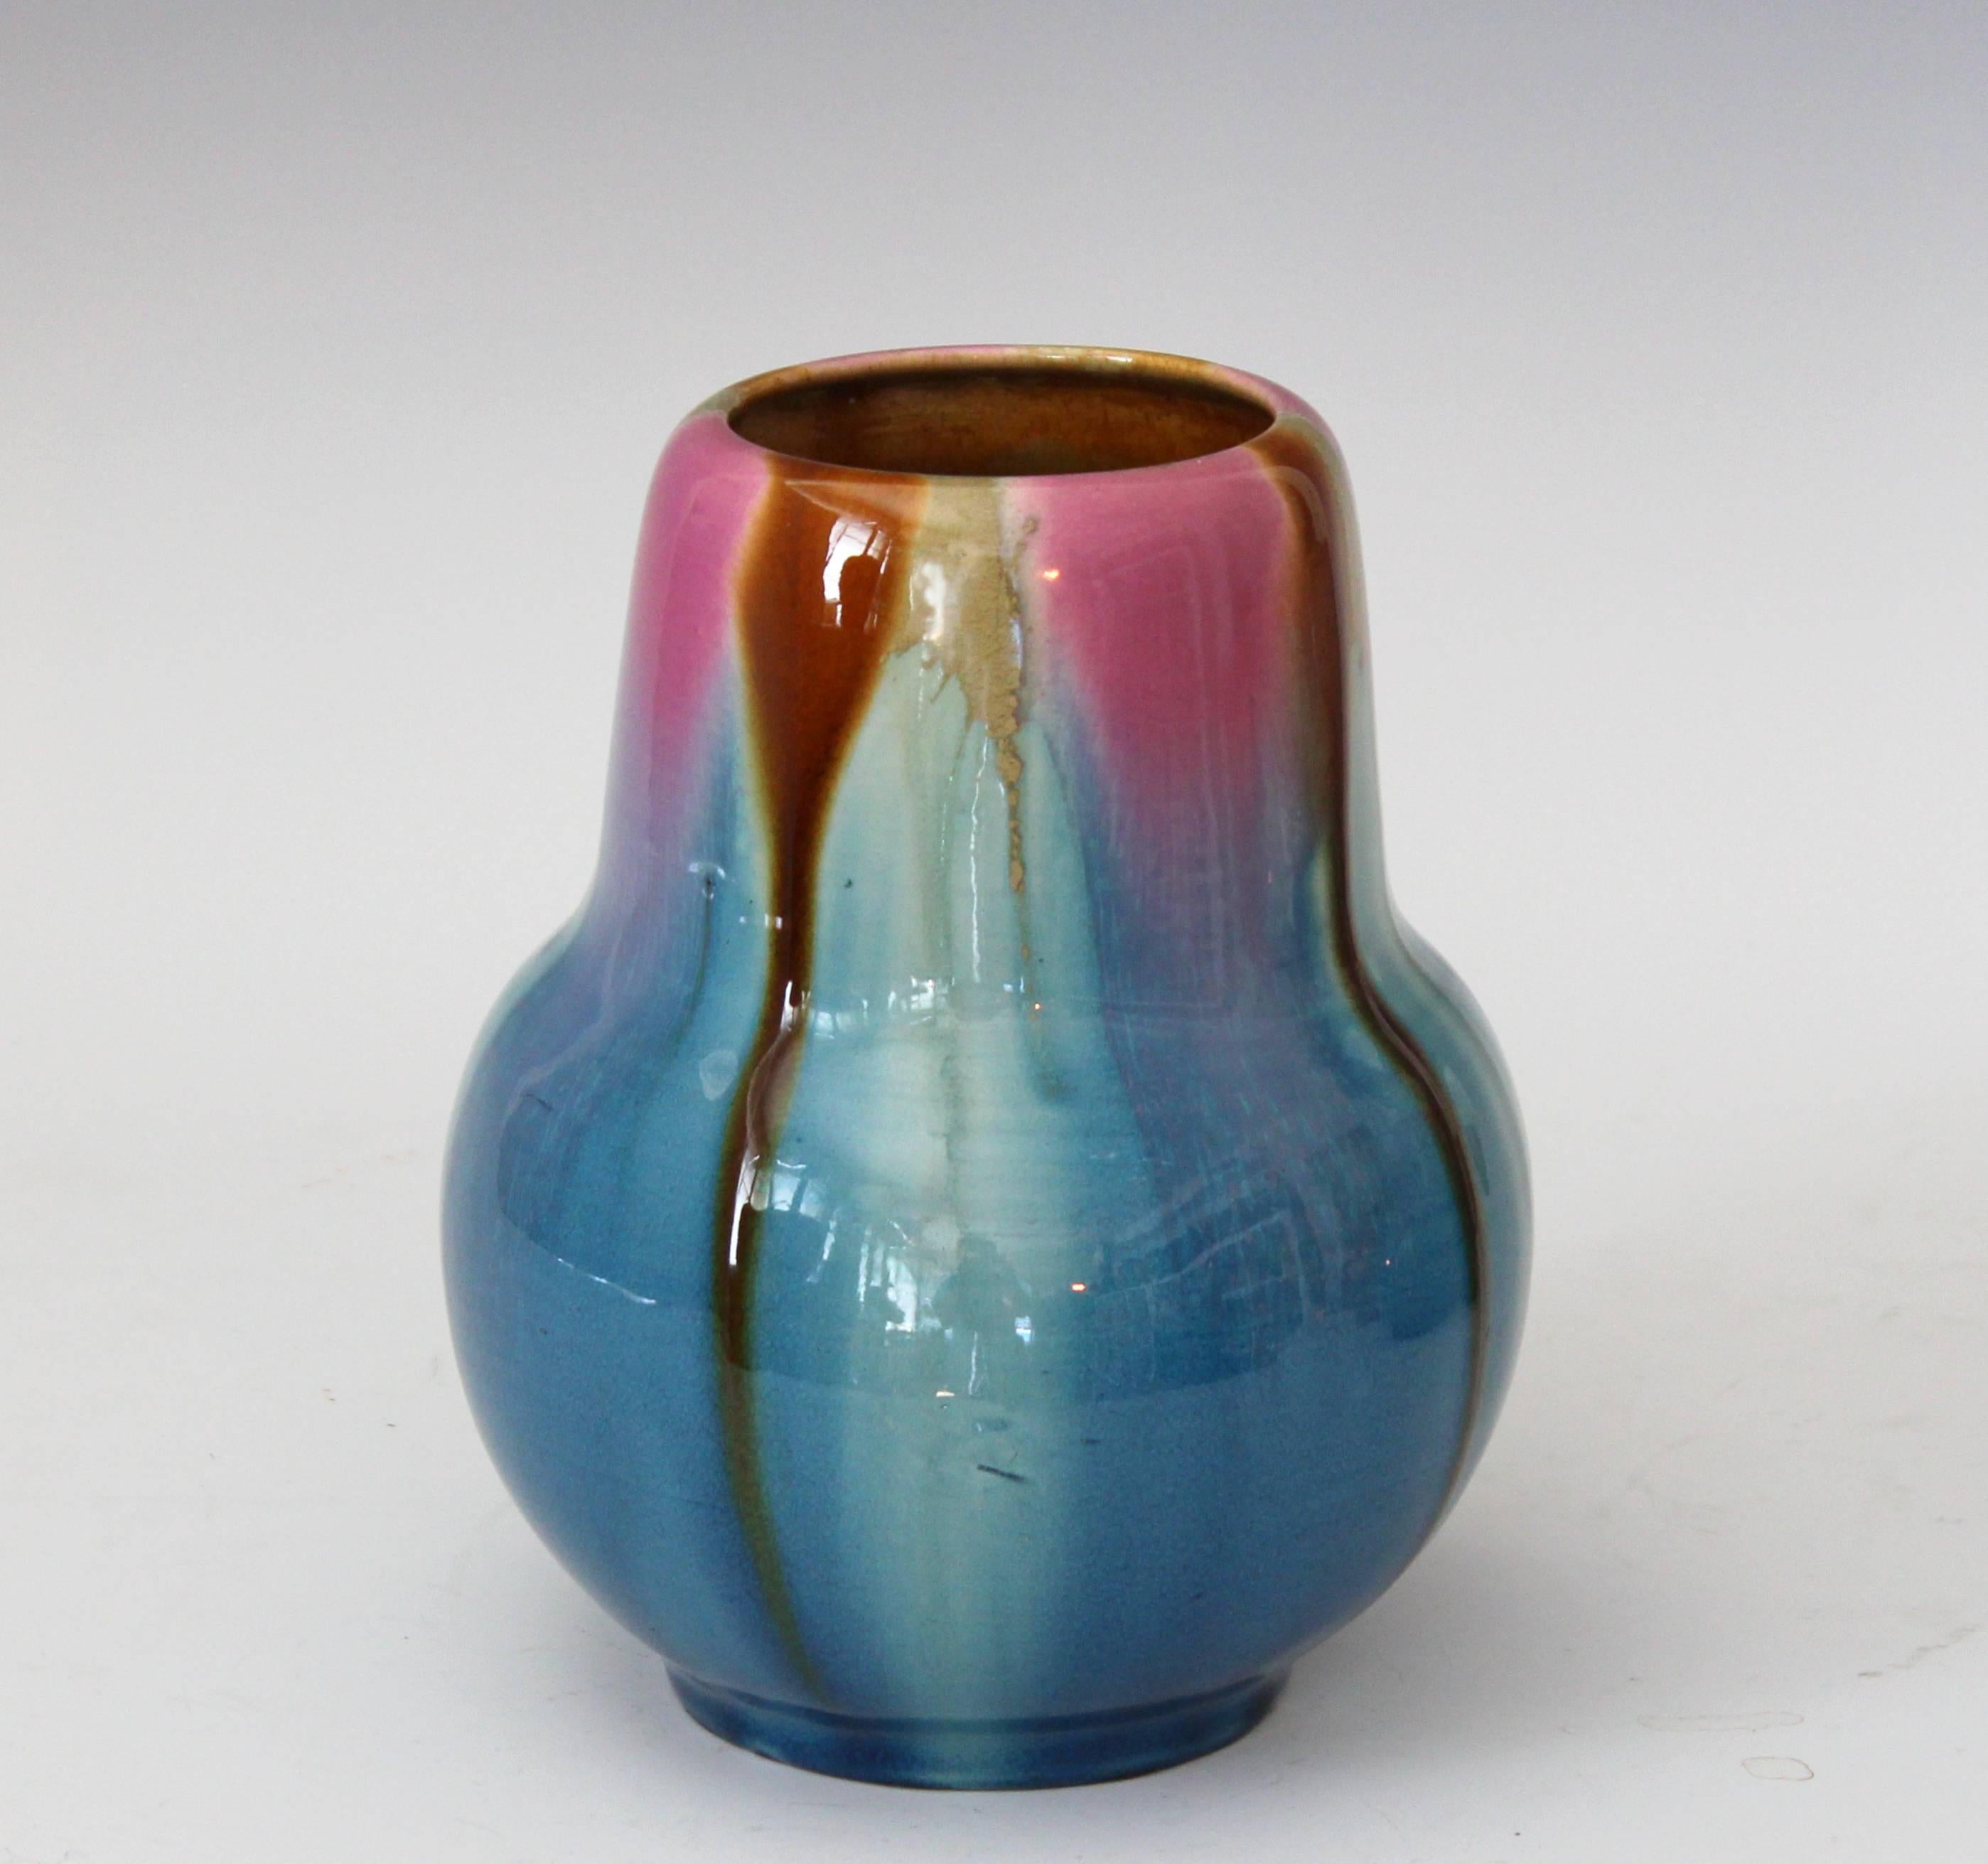 Vintage Awaji vase in organic form with pink, khaki and caramel drip glaze over turquoise, circa 1930. Impressed export and kiln marks. Measures: 7